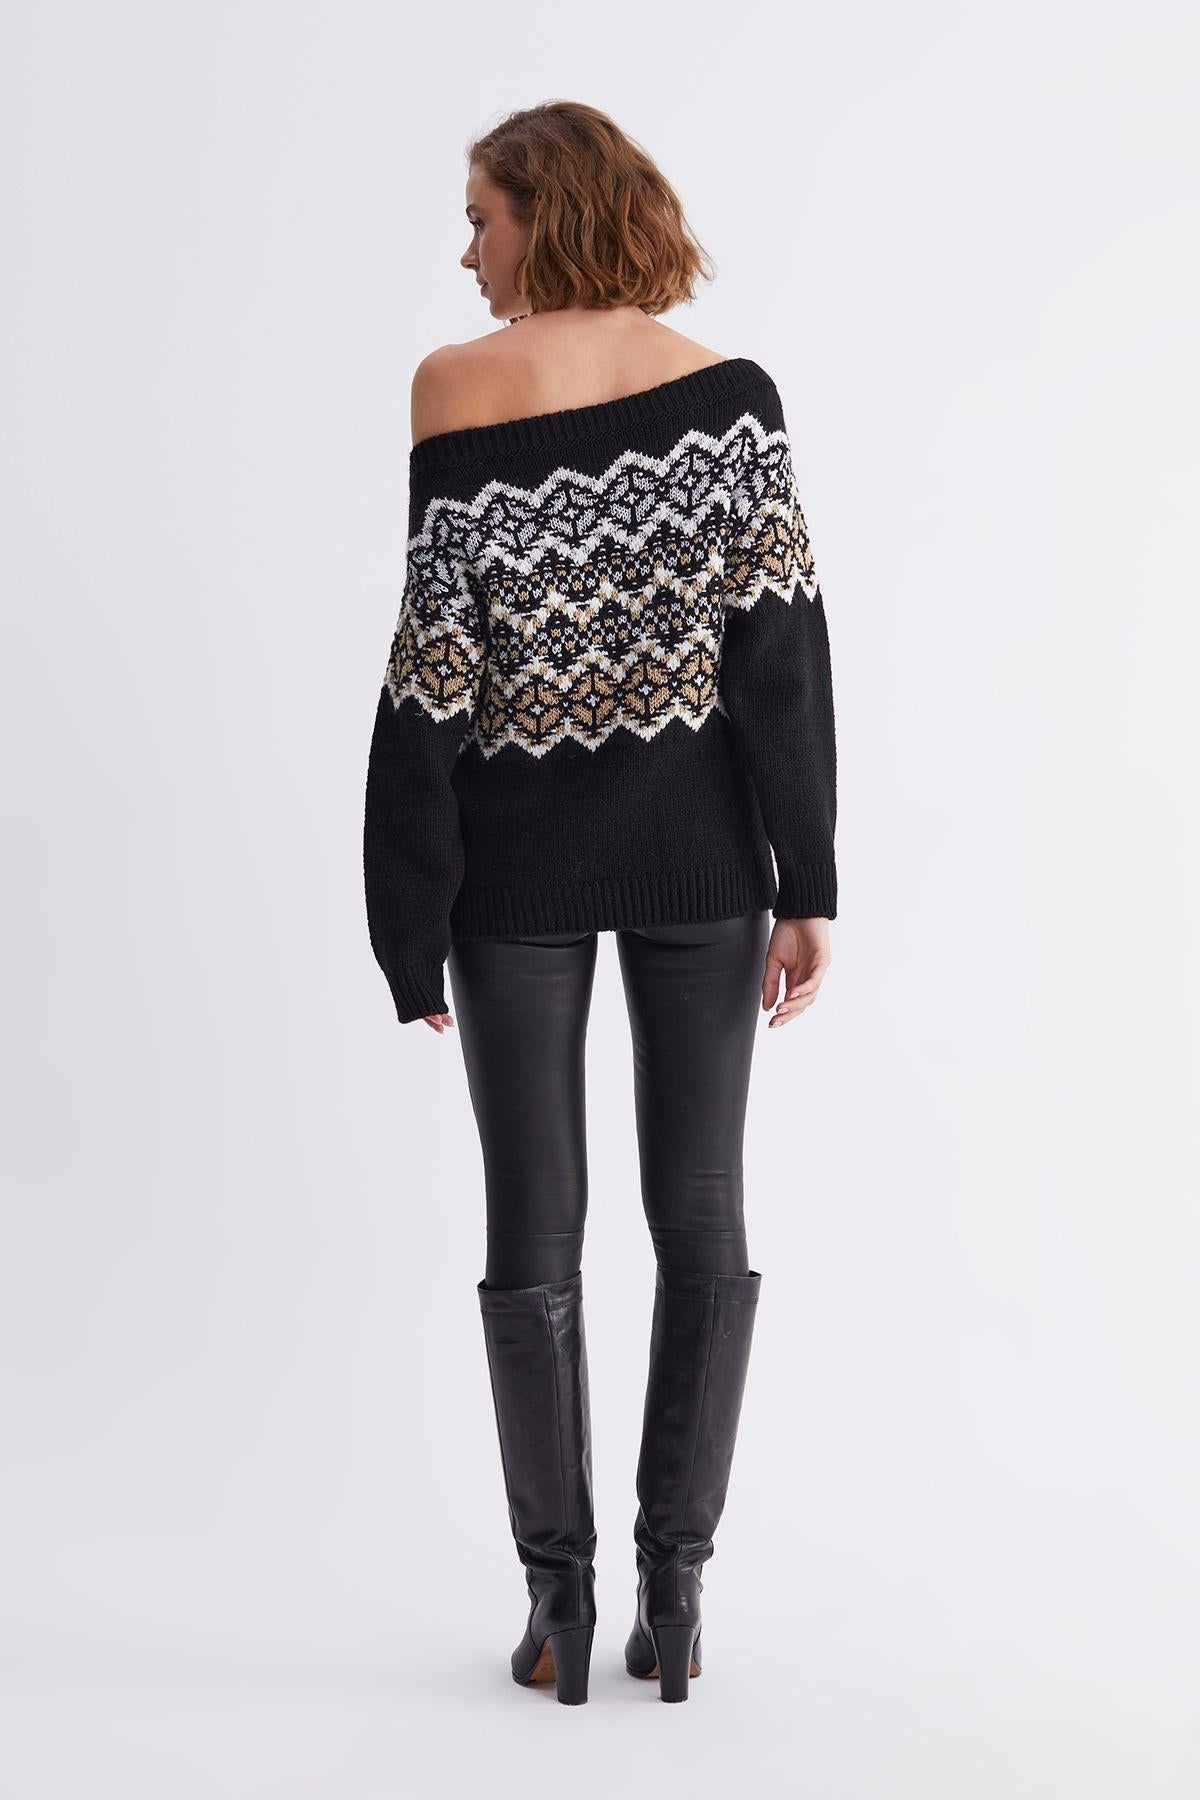 Low Shoulder Stone Embroidered Patterned Knitwear Sweater